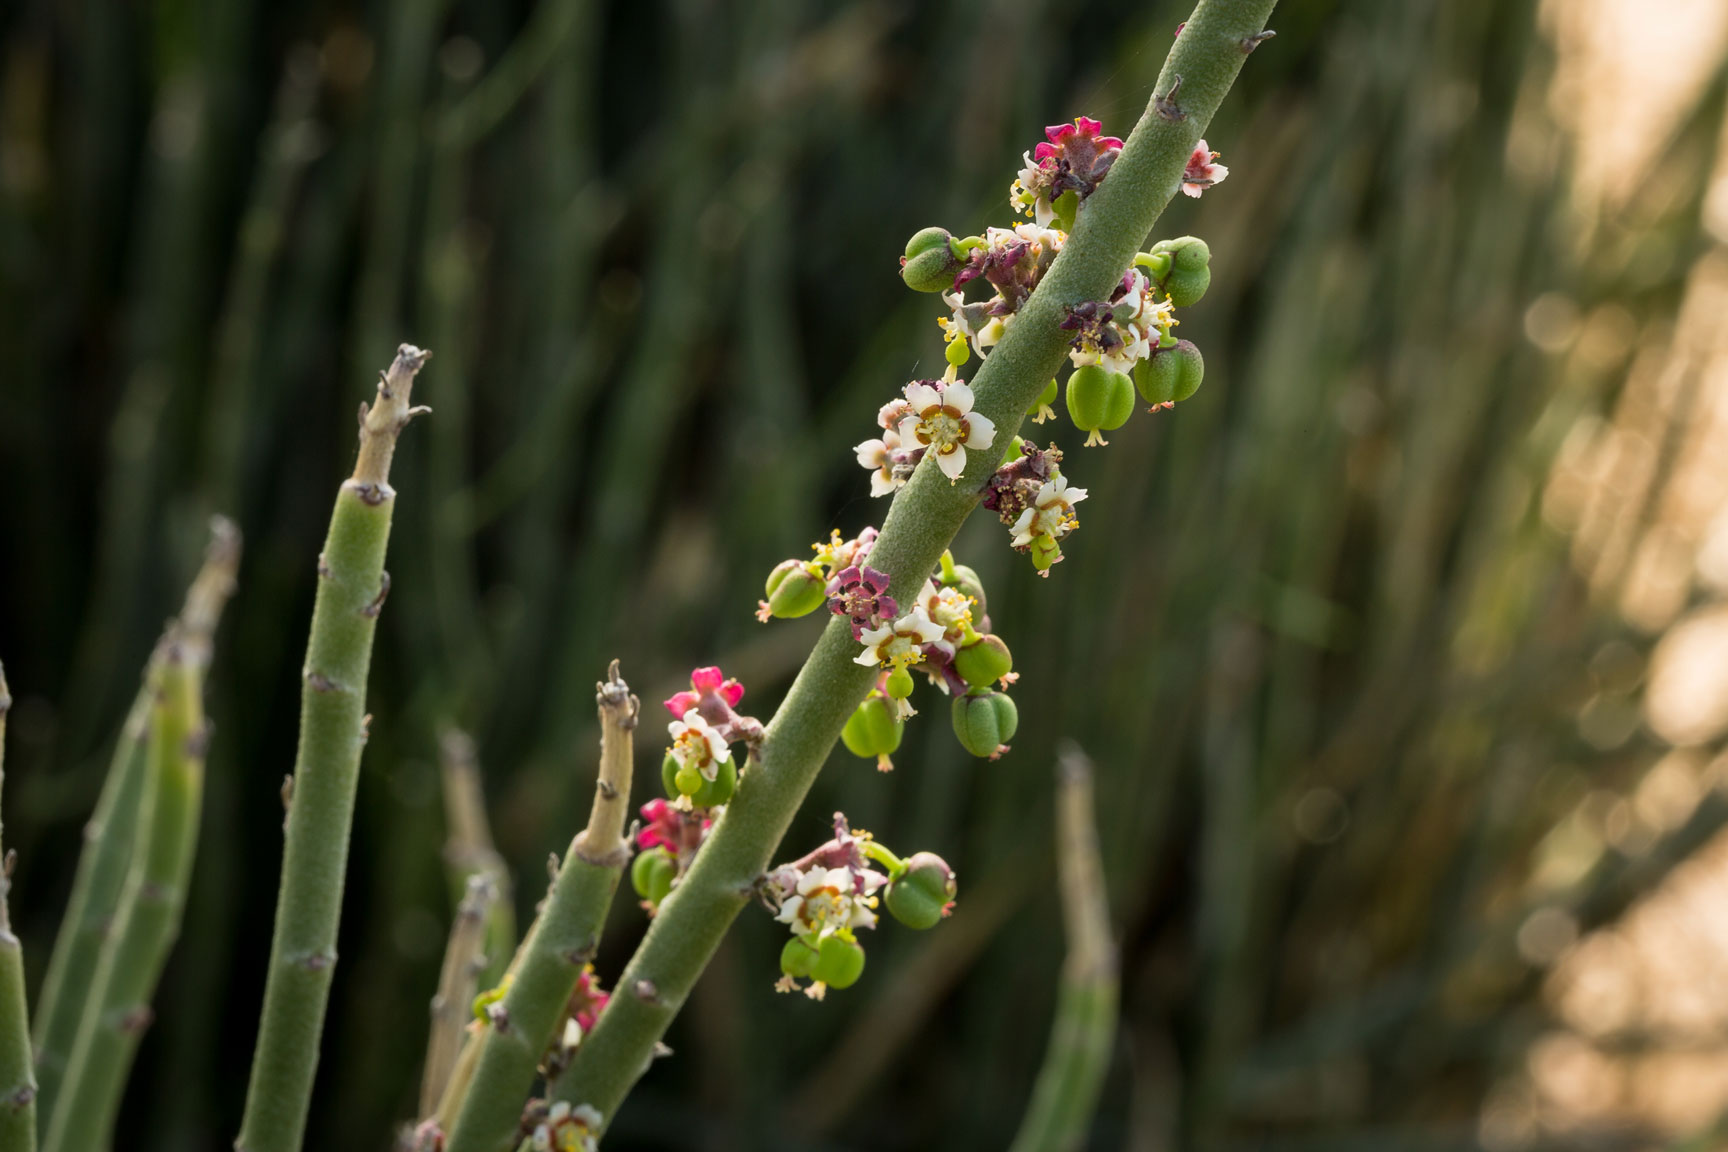 Small pink flowers and seed pods hug the thin green stem of the Candelilla plant.